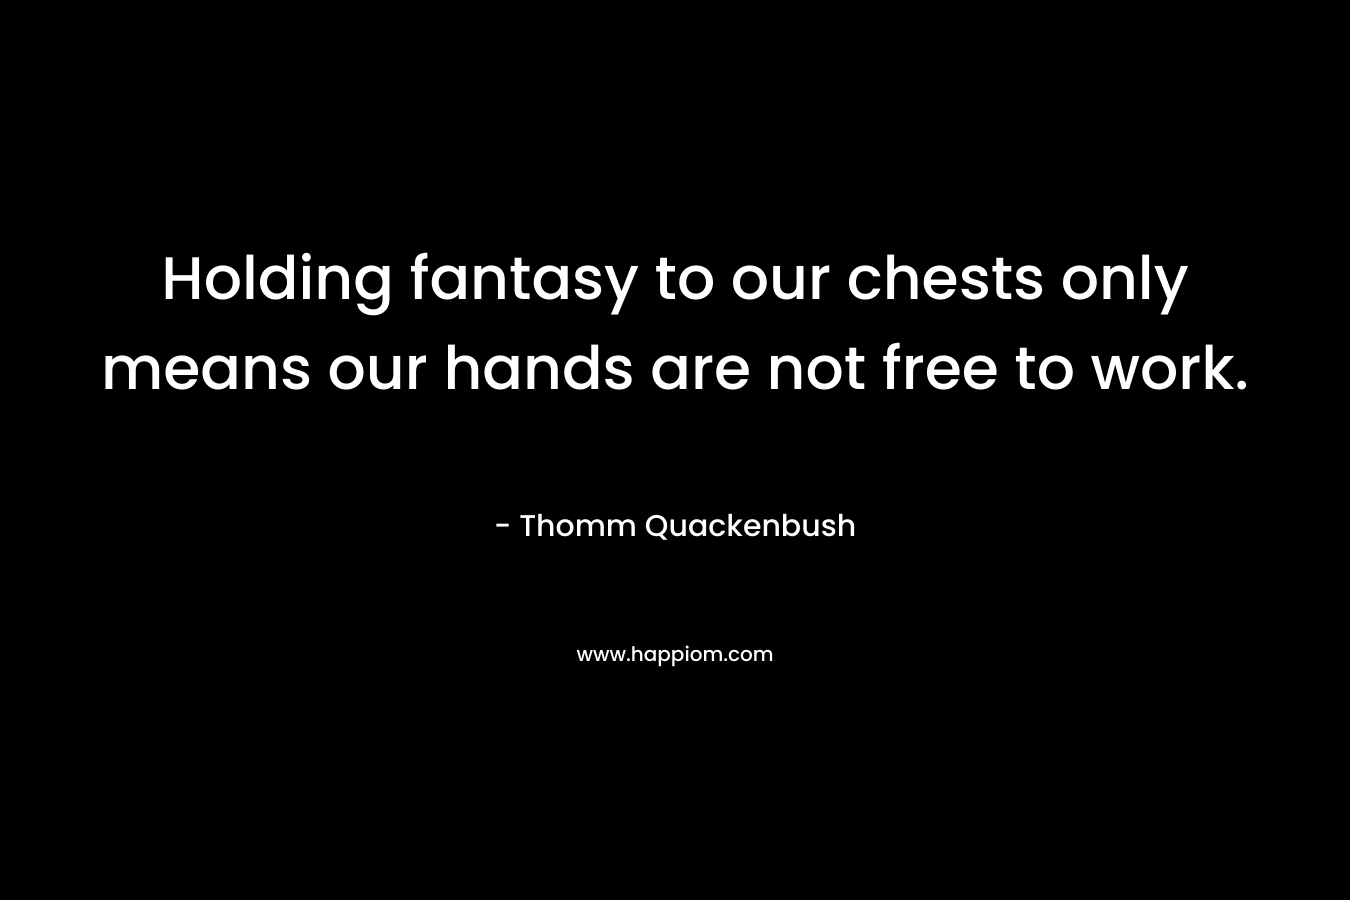 Holding fantasy to our chests only means our hands are not free to work.